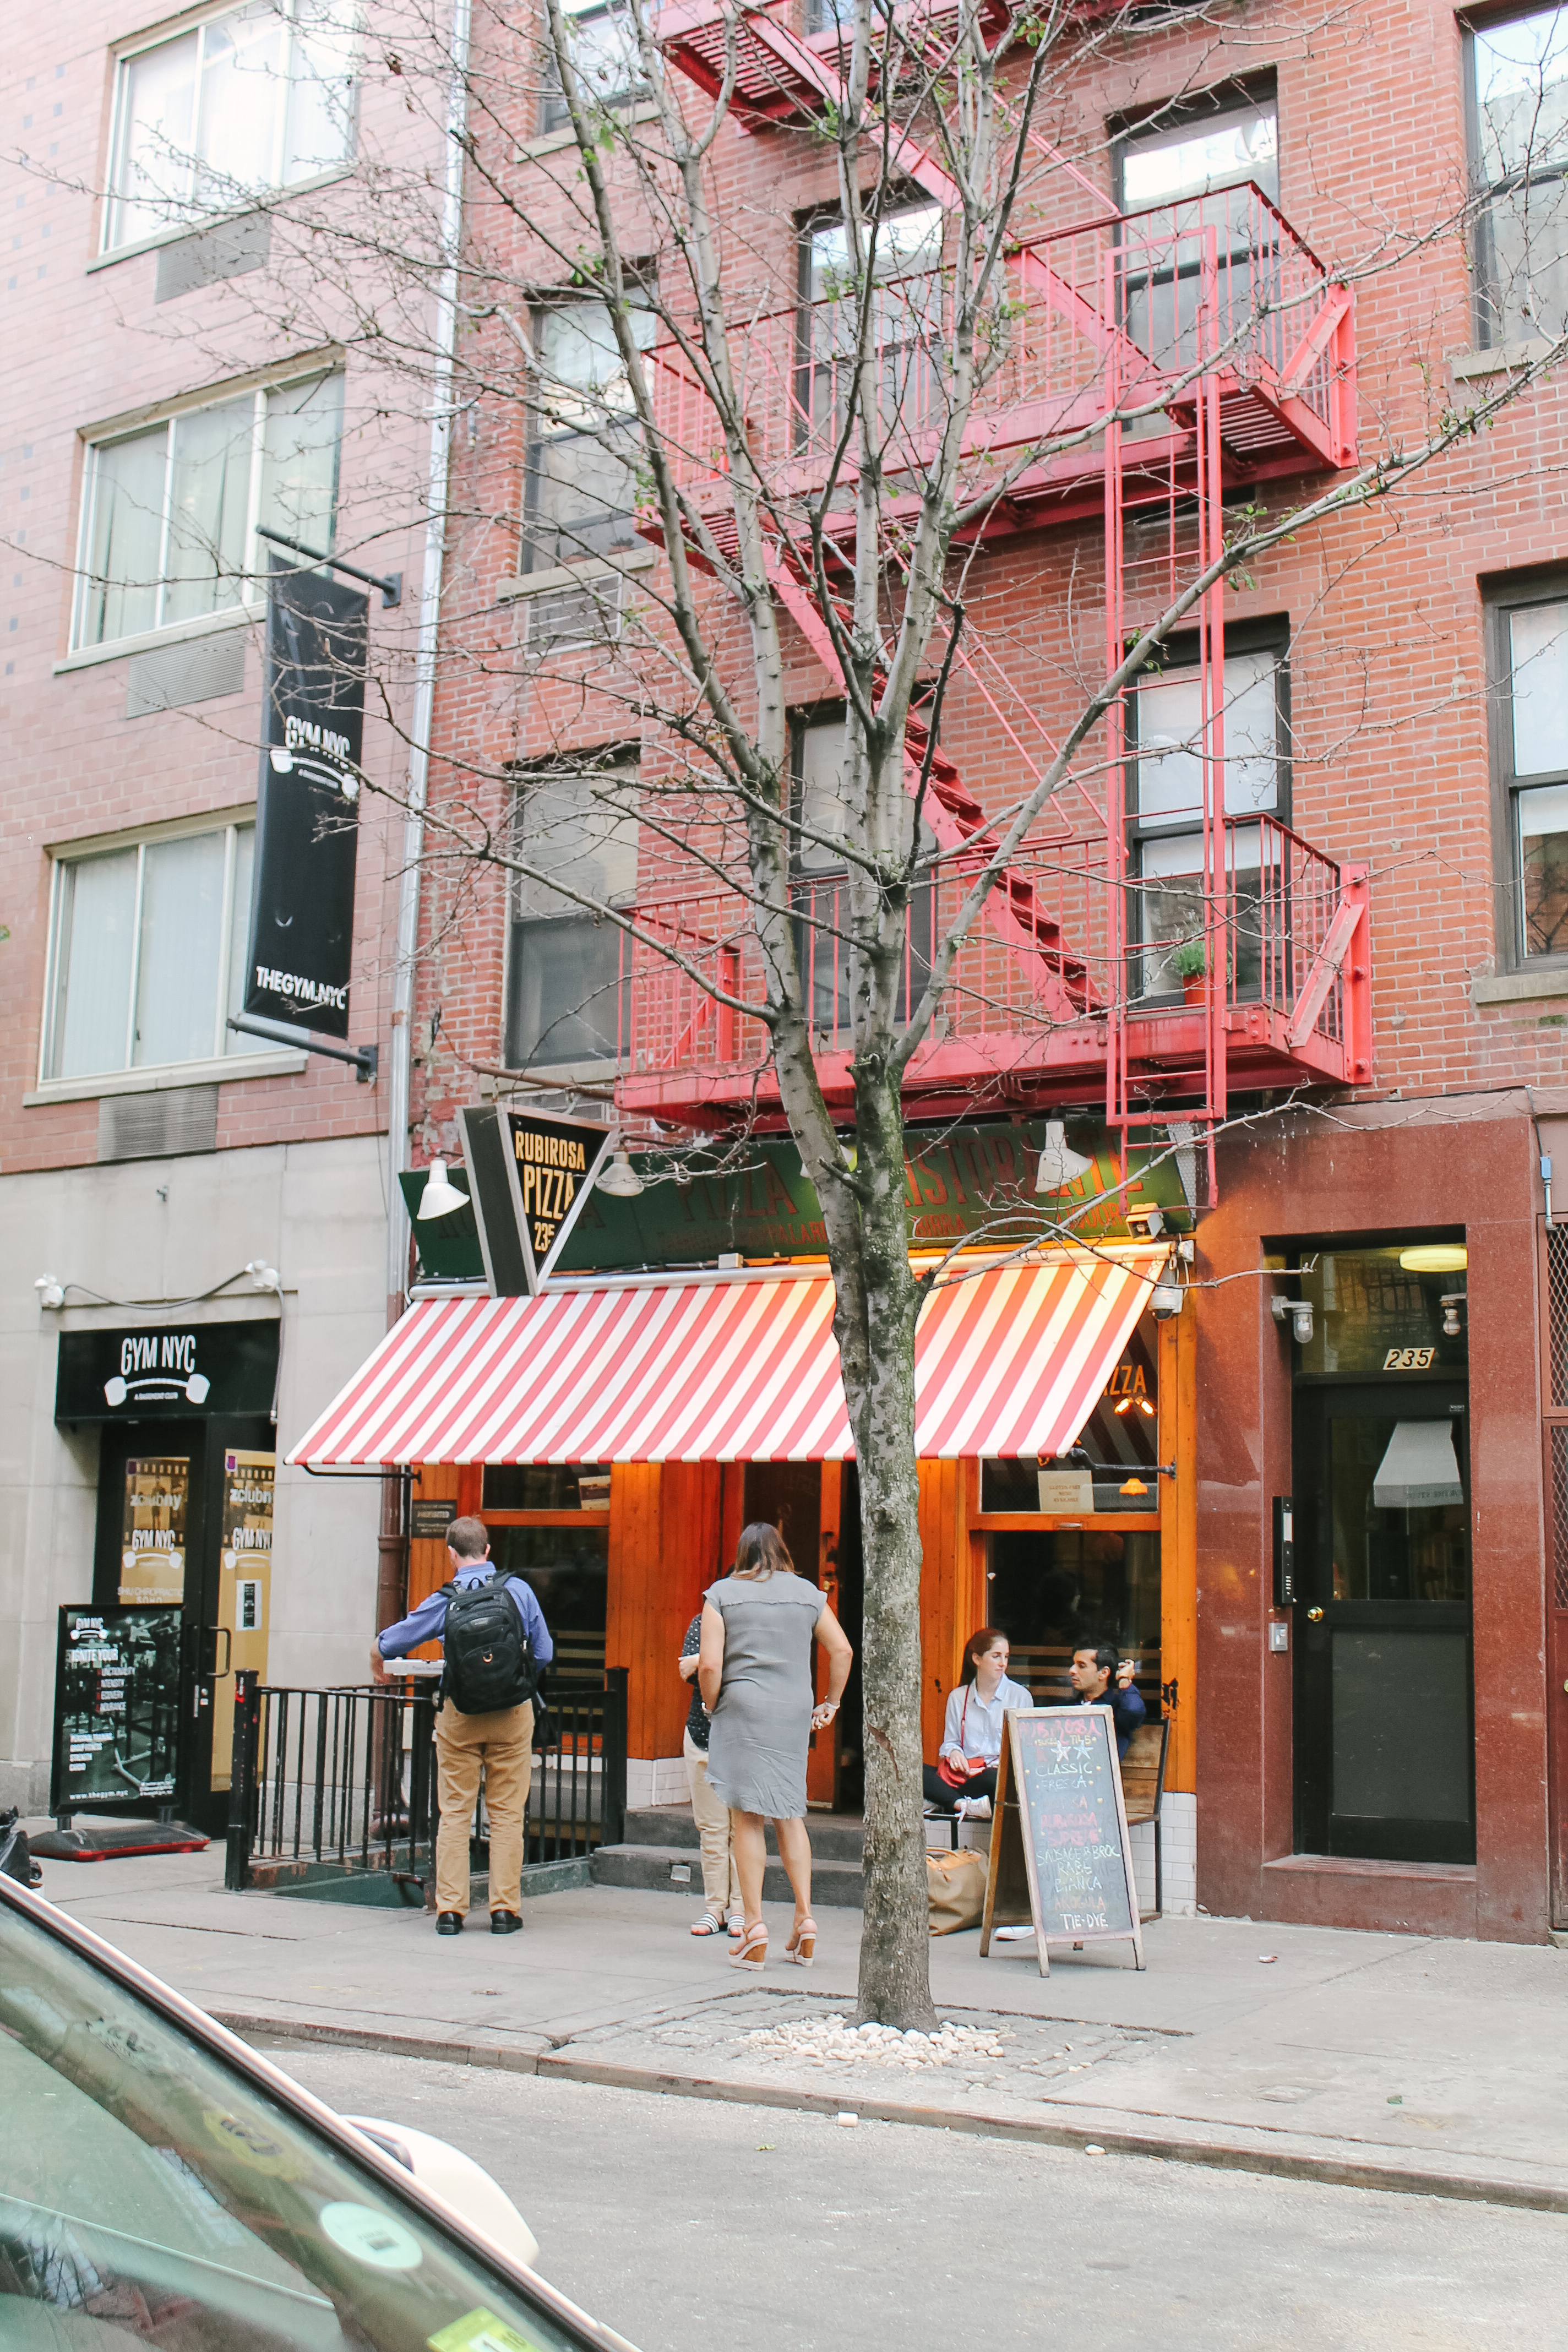 A must read! An NYC restaurant guide featuring all of New York City's best restaurants, from brunch to late night dinners. It even details key dishes to try at each restaurant! Rubirosa is a staple!